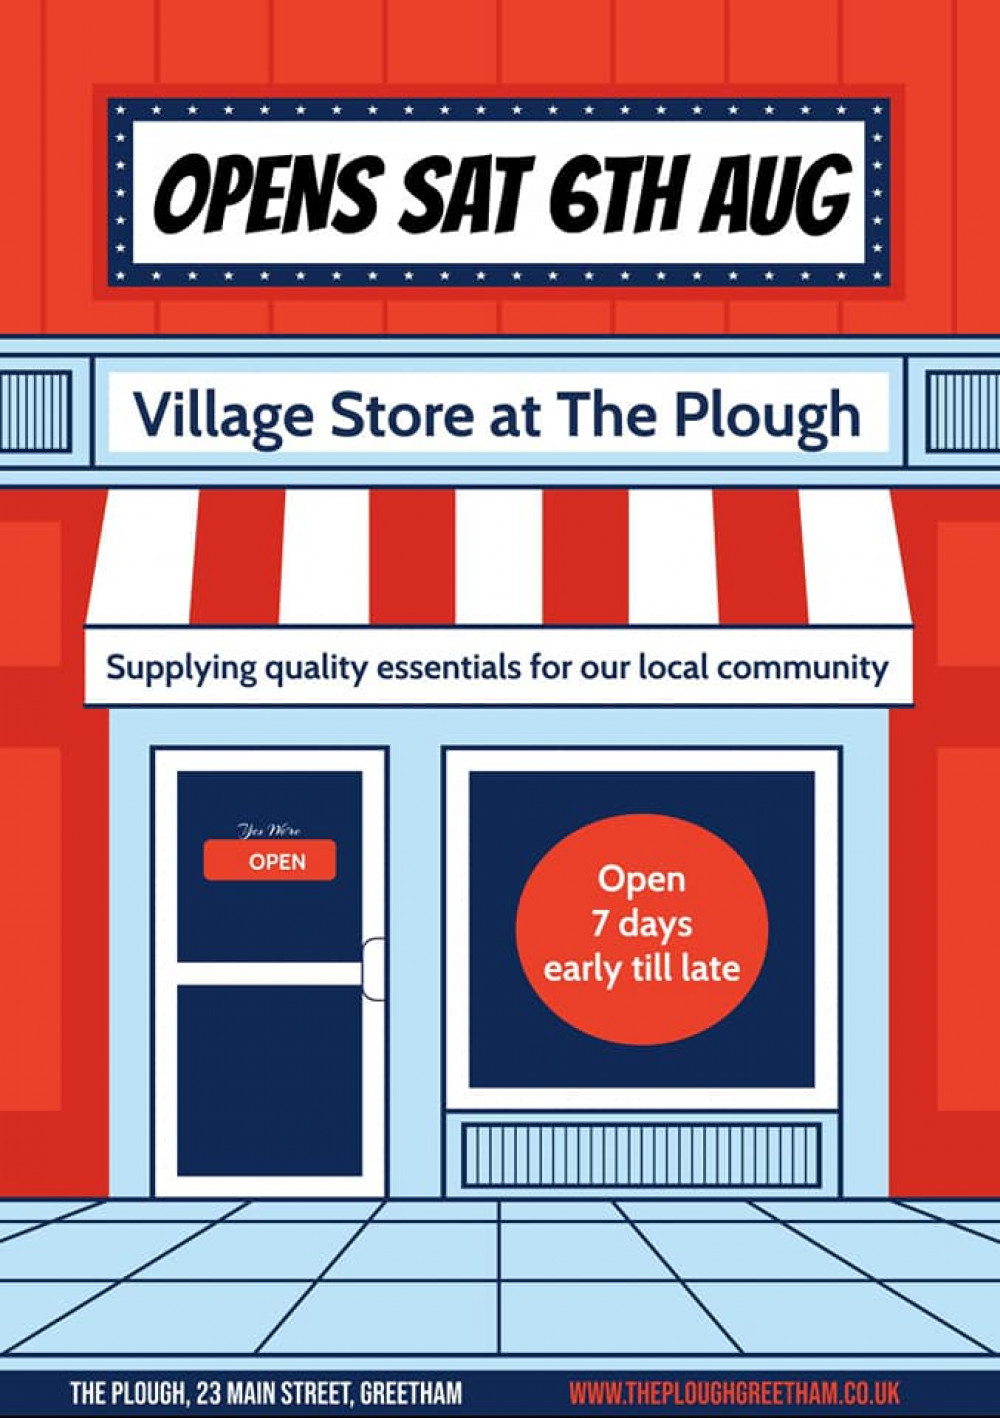 The Plough Village Store will open this Saturday (image courtesy of The Plough)